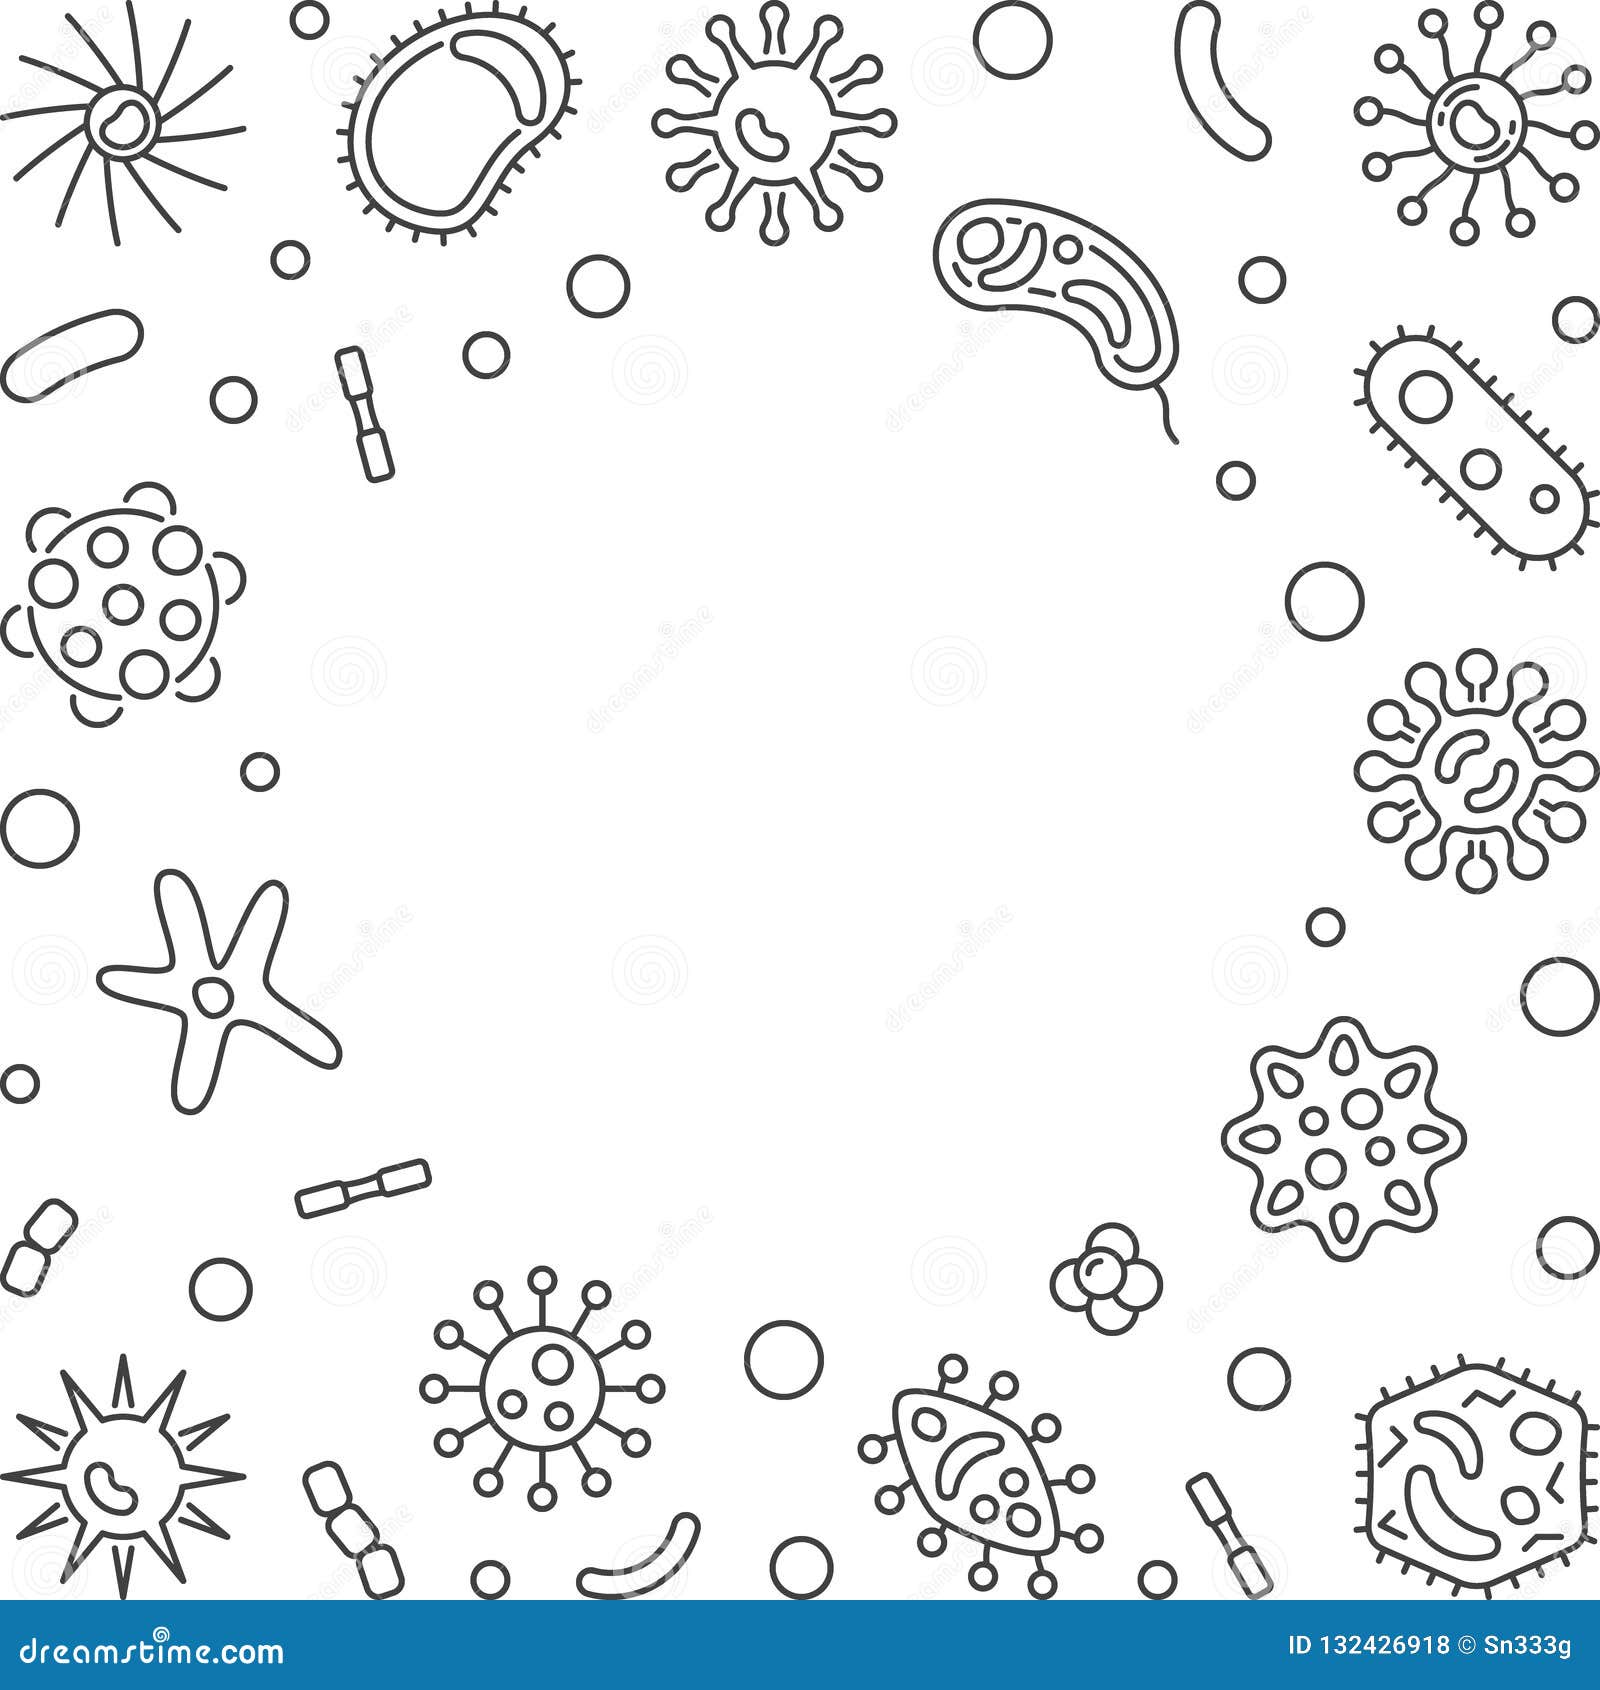 Human Microbiota Square Vector Frame in Thin Line Style Stock Vector ...